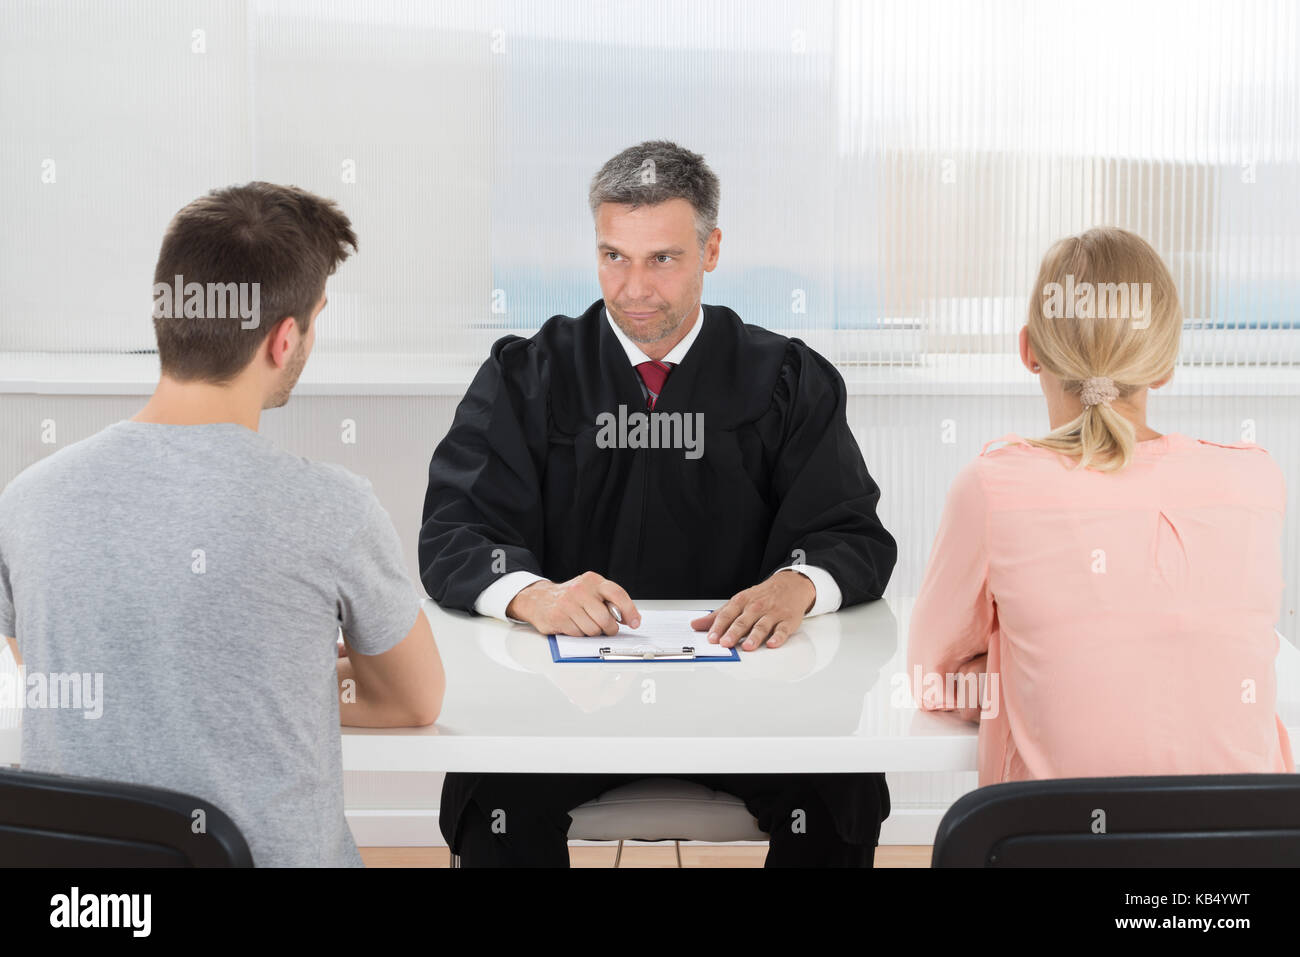 Mature Male Judge Sitting In Front Of Young Couple In Courtroom Stock Photo